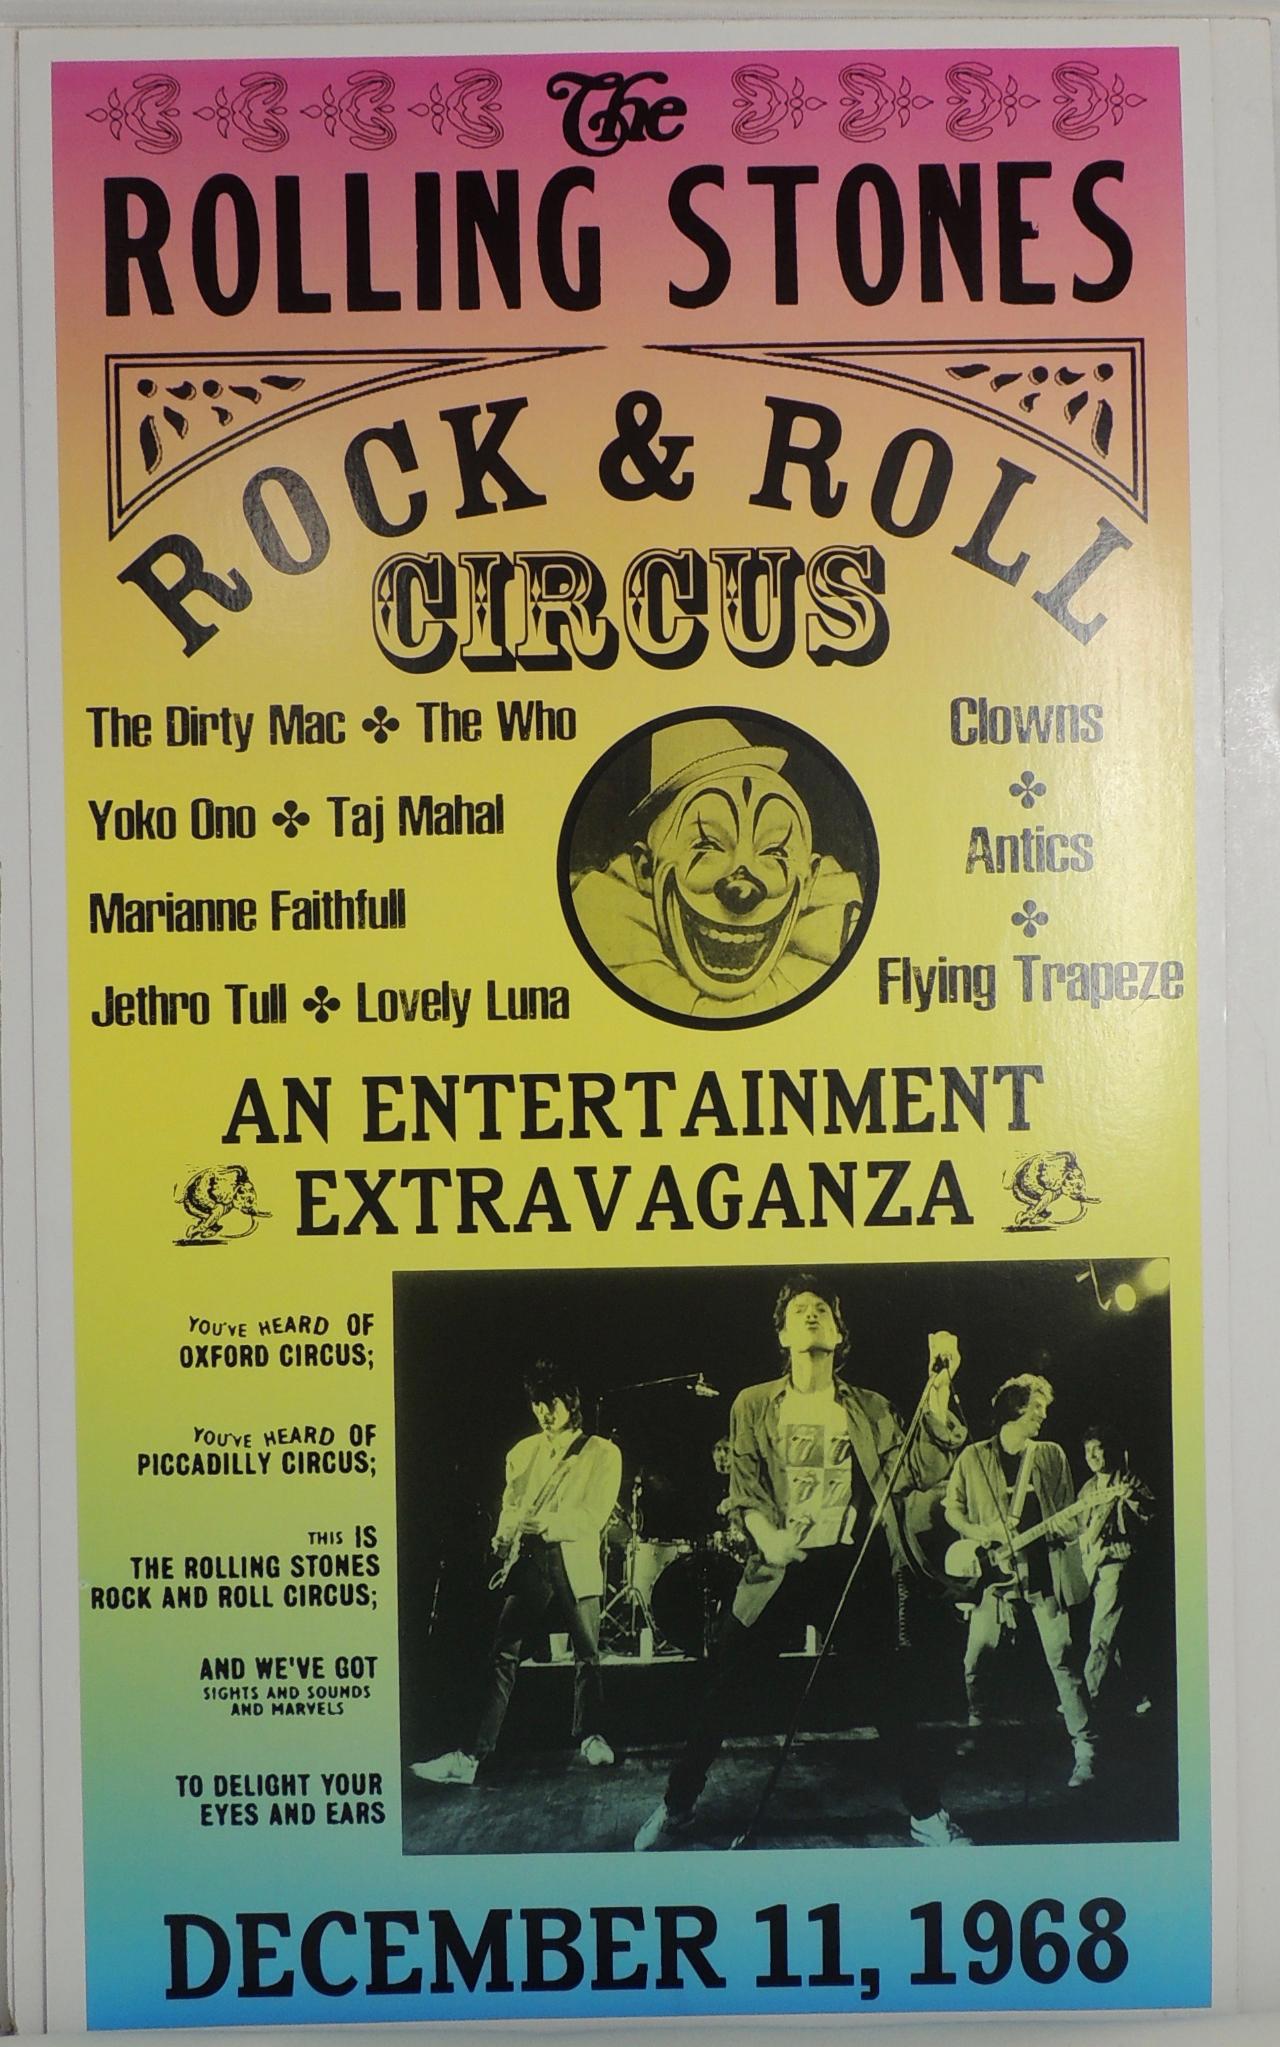 Concert Poster - The Rolling Stones Rock And Roll = 22x14-hotRAGS.com